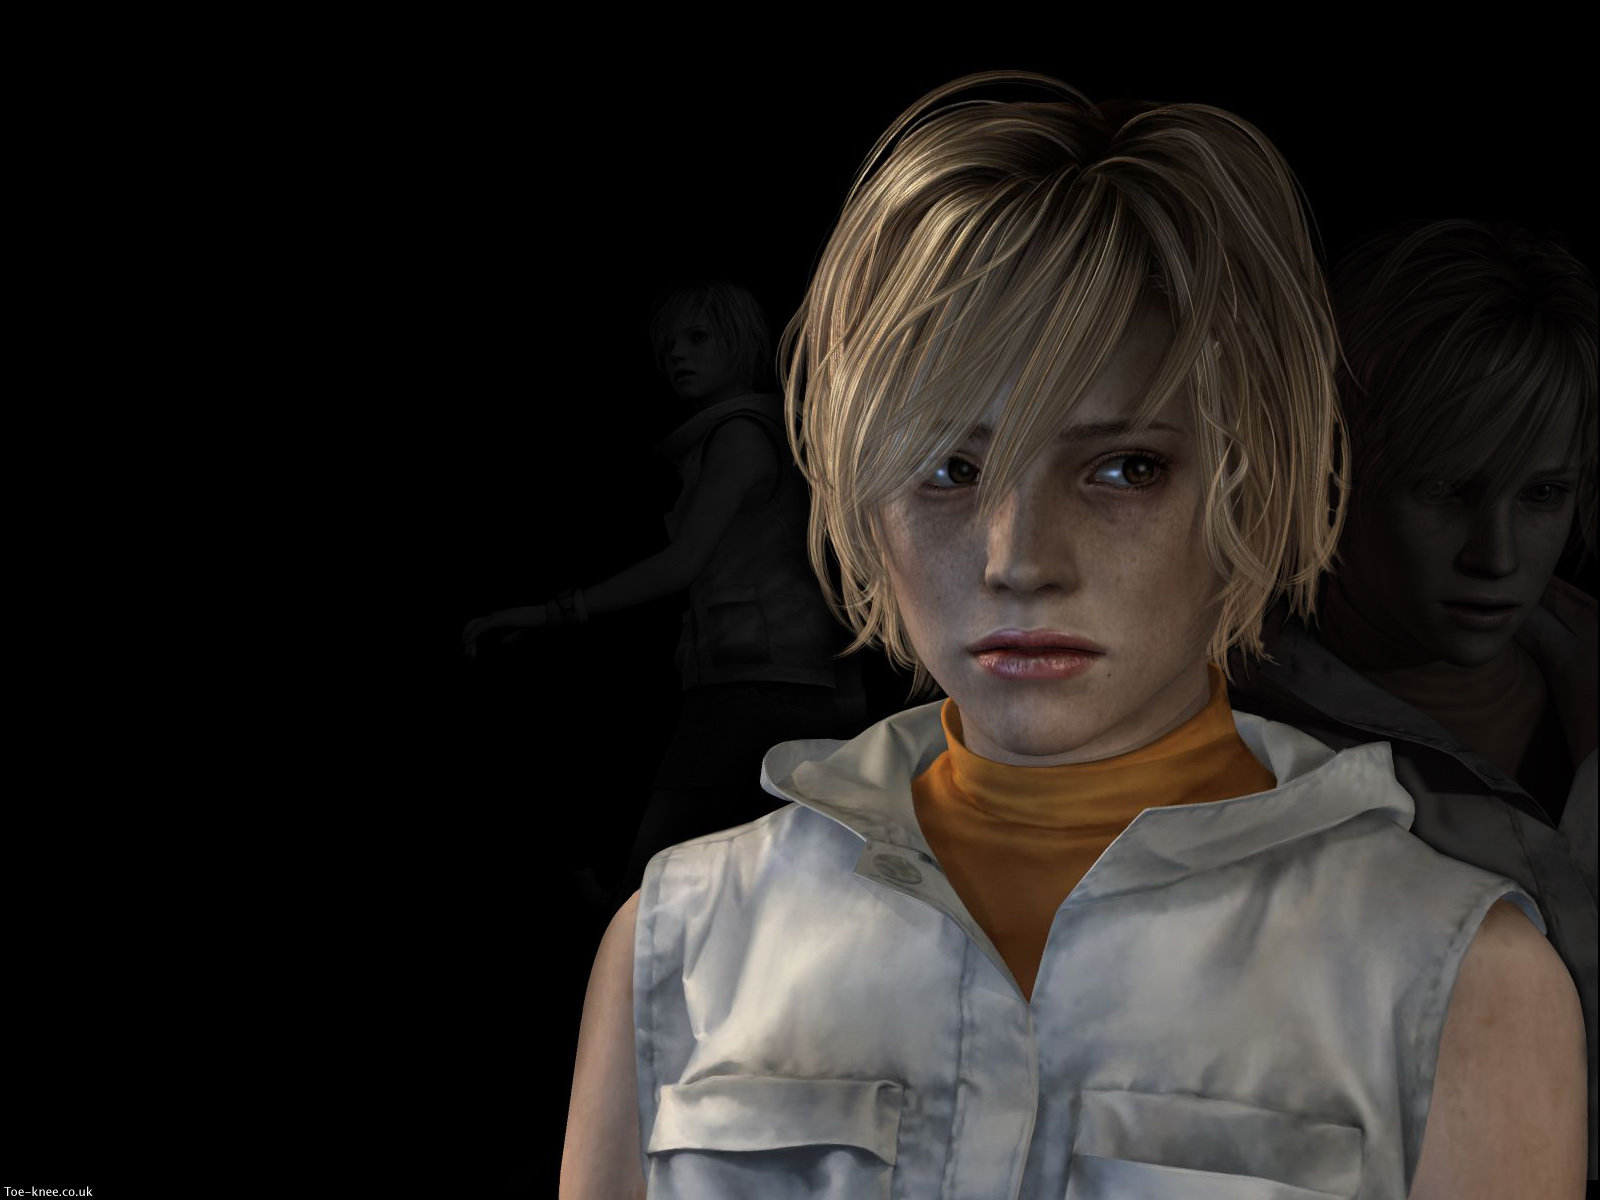 2. "Silent Hill" speedrun tutorial by blue-haired girl - wide 11